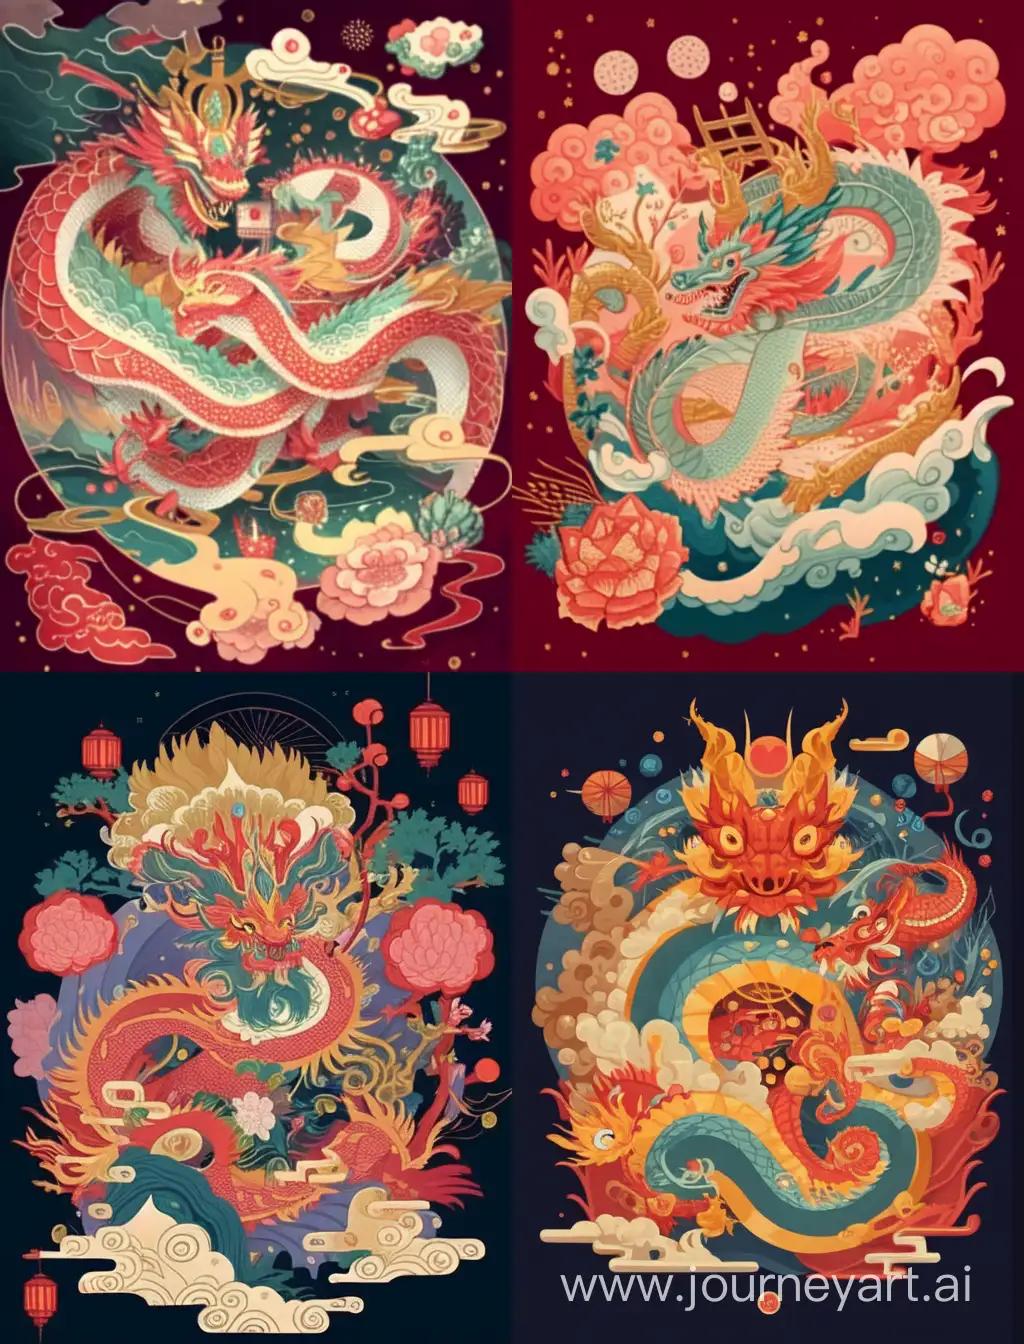 Majestic-Chinese-Dragon-Amidst-Festive-New-Year-Decorations-Victo-Ngai-Inspired-Illustration